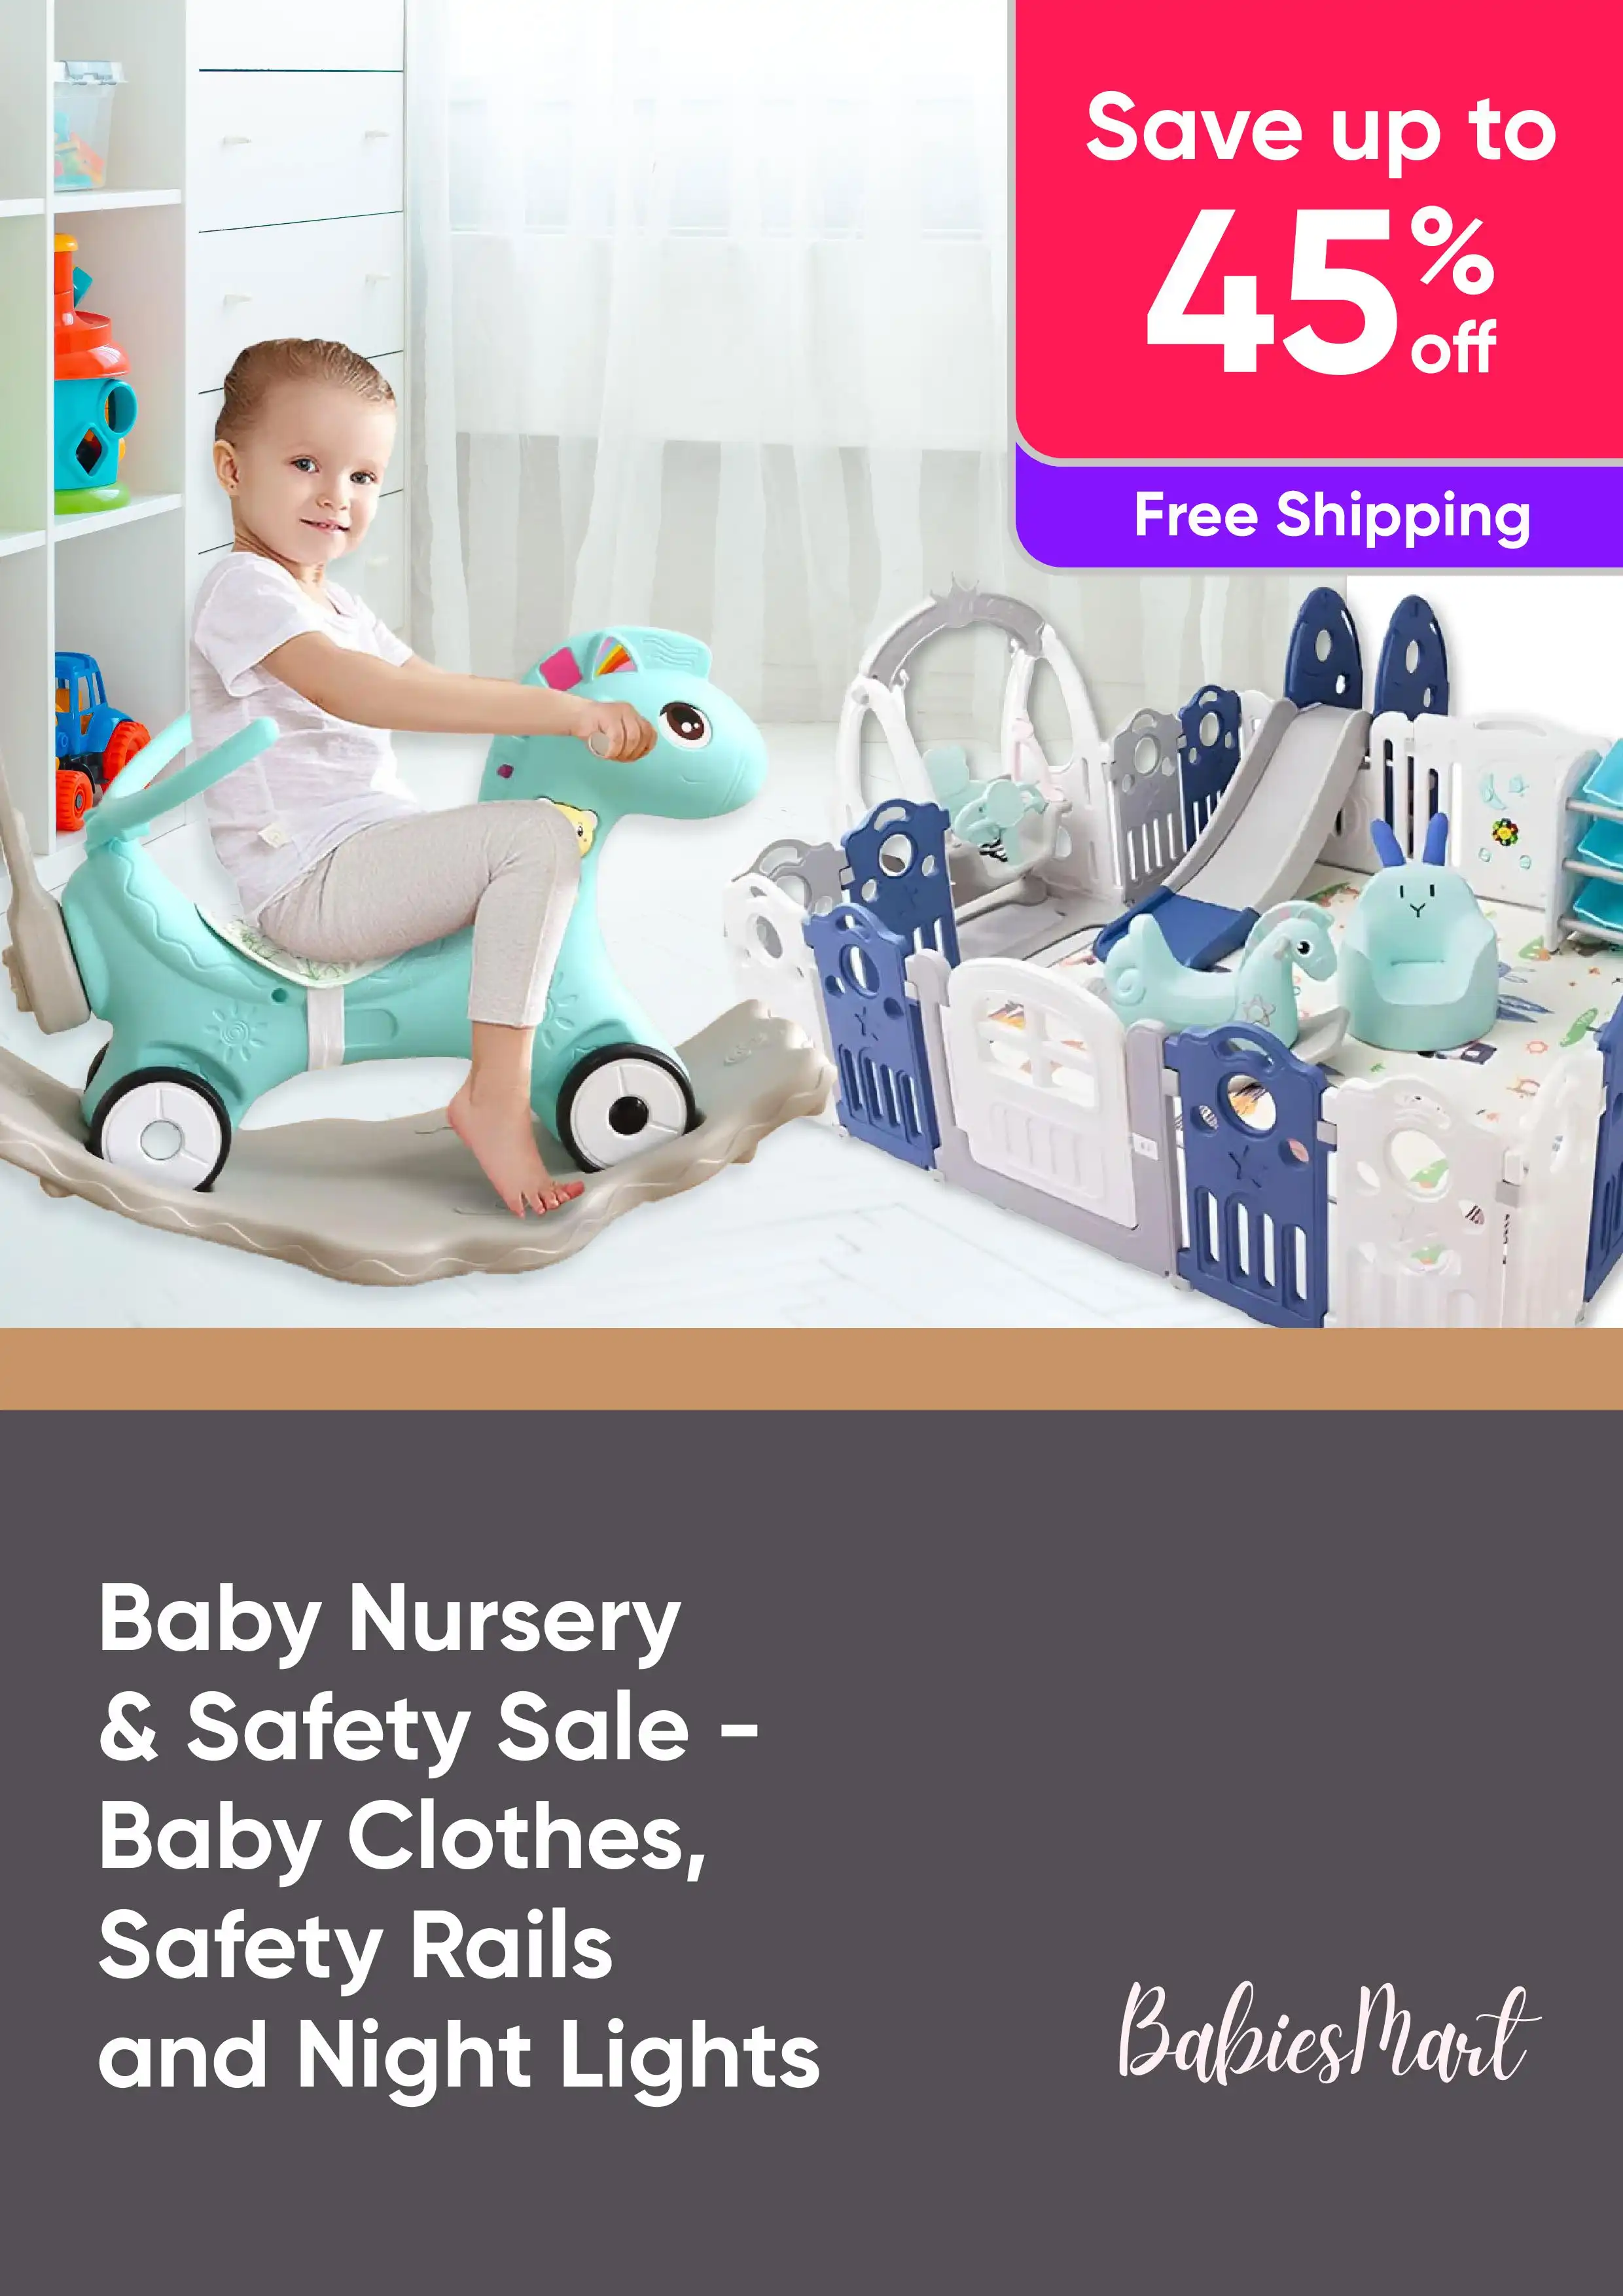 Baby Nursery & Safety Sale: Shop Baby Clothes, Safety Rails and Night Lights